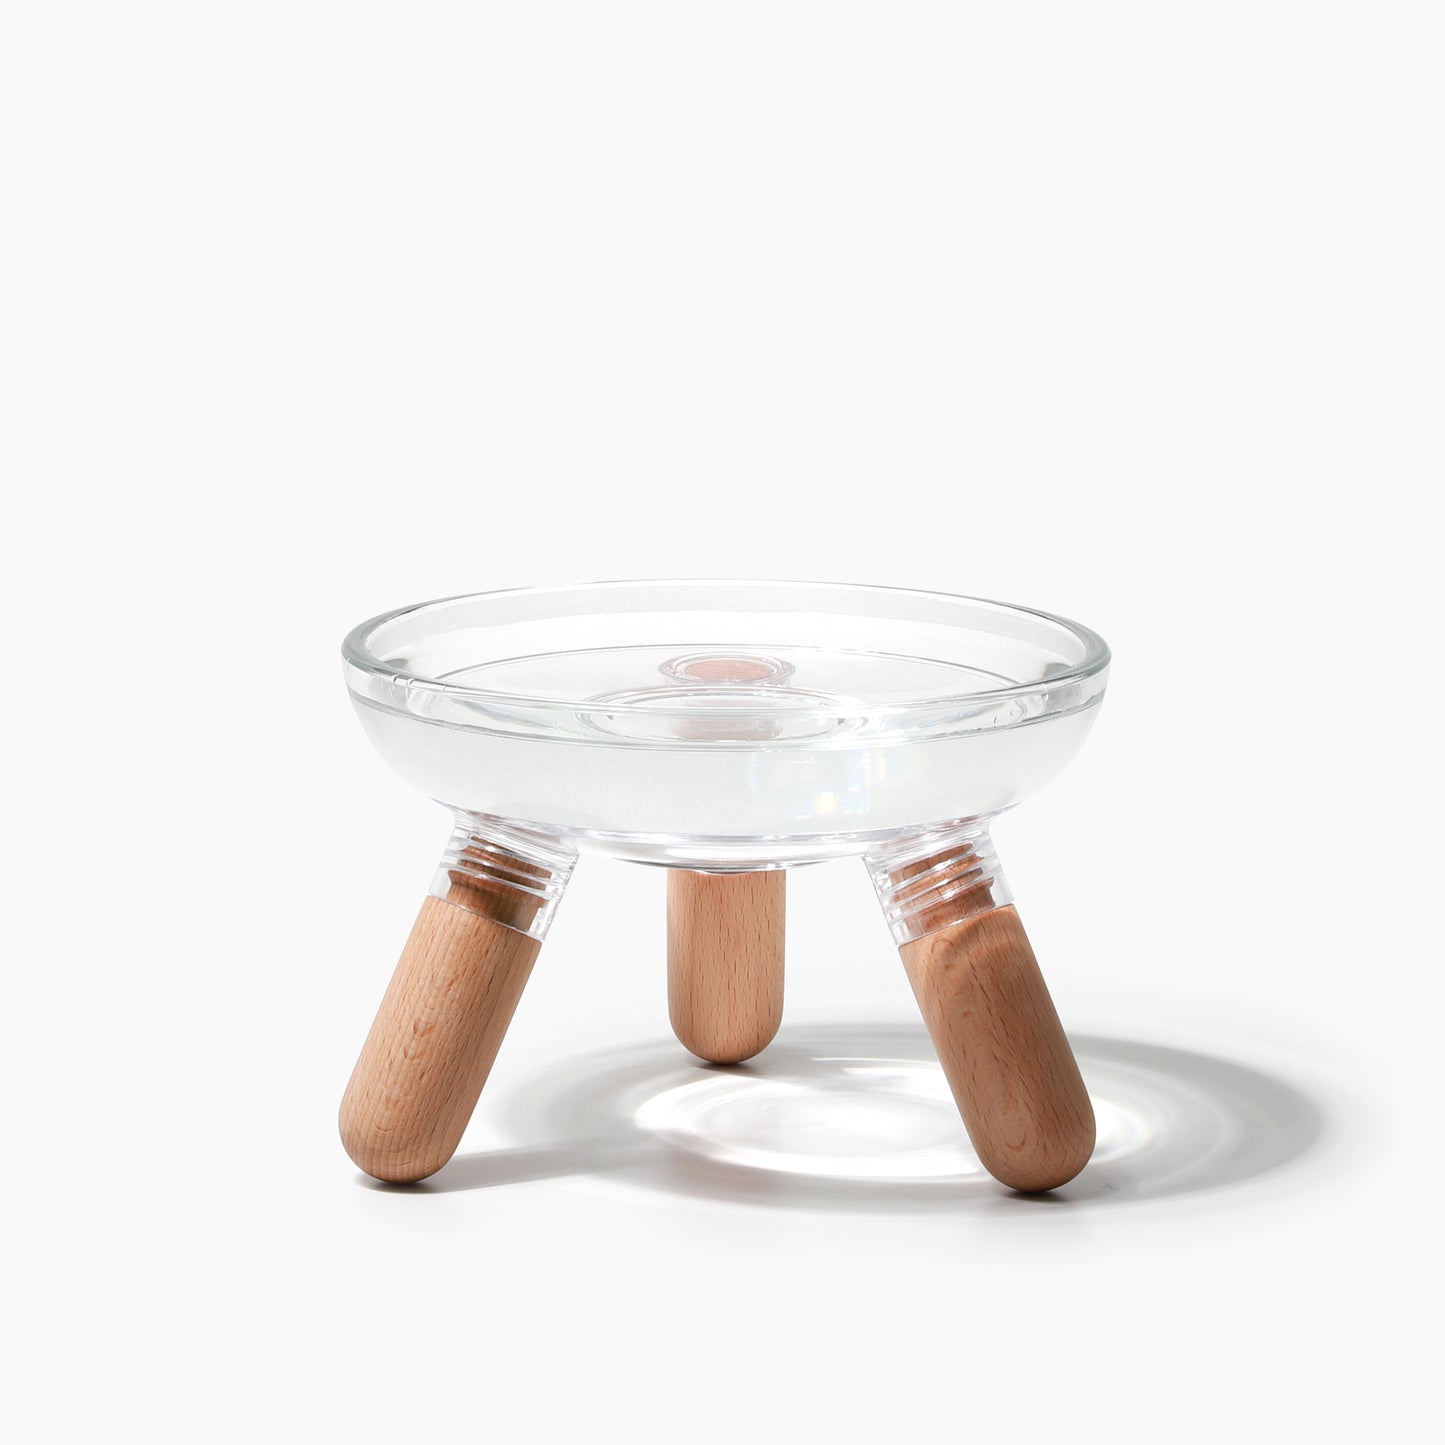 Inherent Glass Table - Beech Wood - Suro